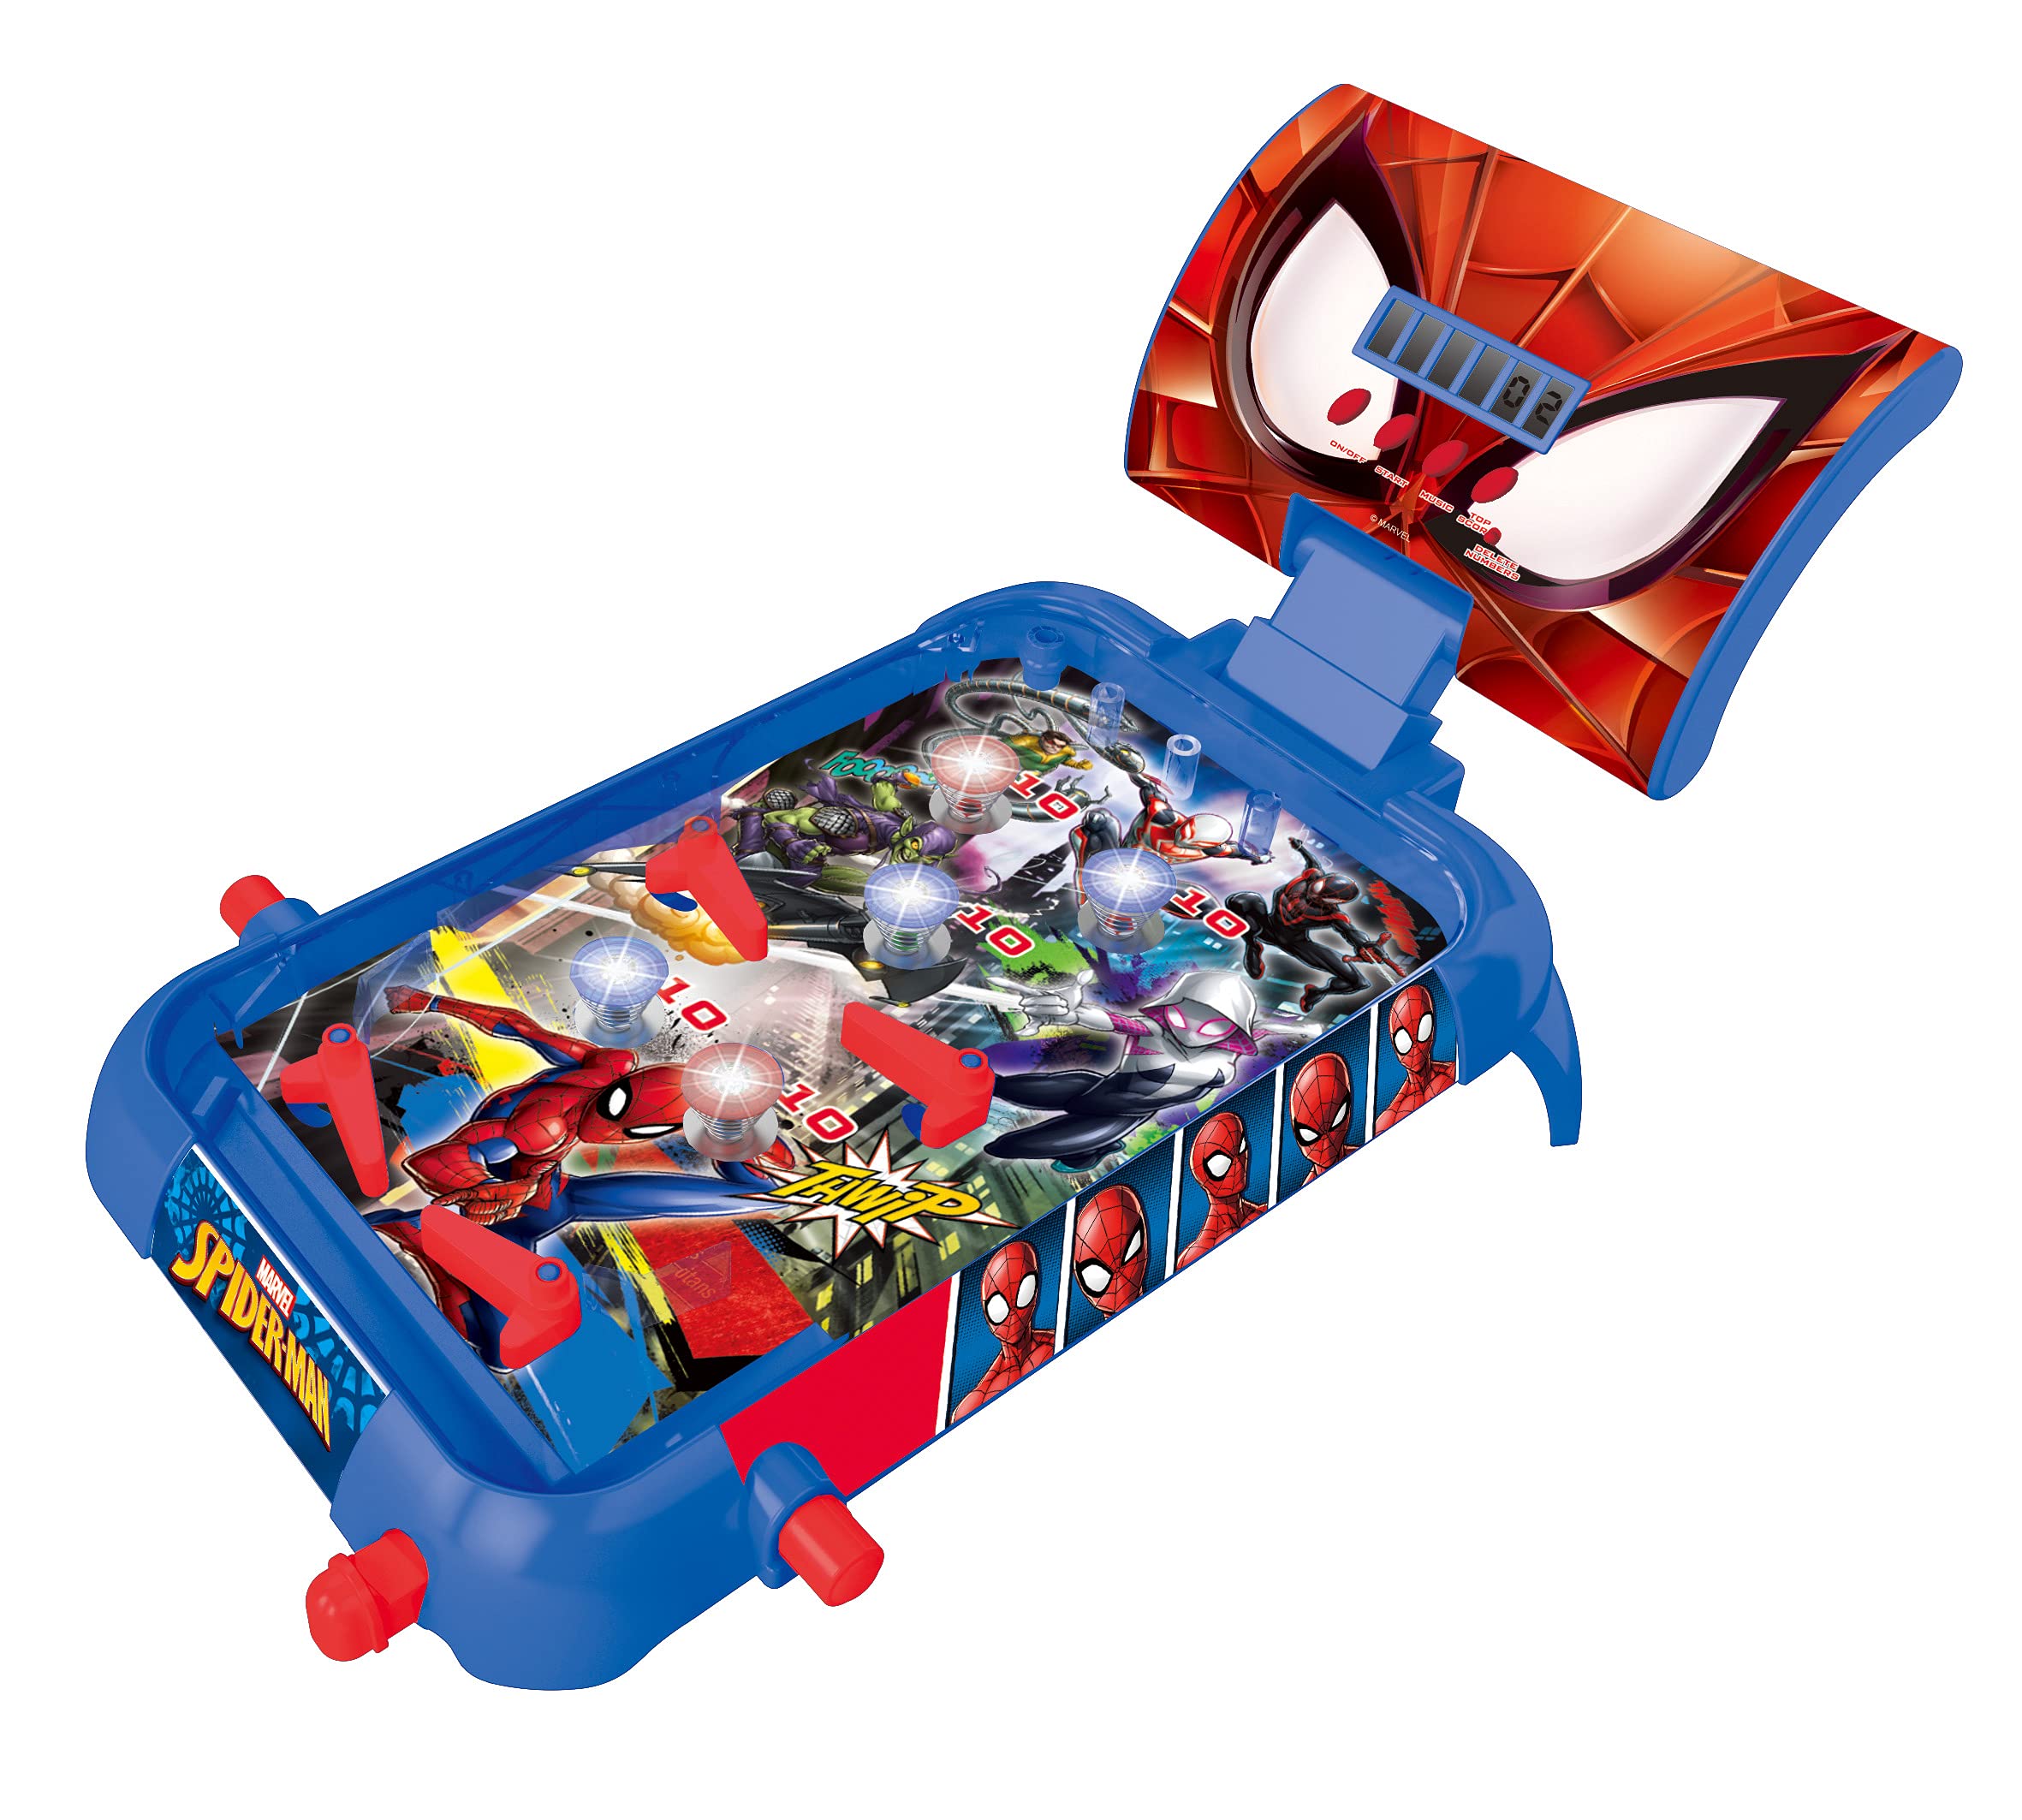 Lexibook Marvel Spider-Man, Table Electronic Pinball, Action and Reflex Game for Children and familiy, LCD Screen, Light and Sound Effects, Blue/red, JG610SP